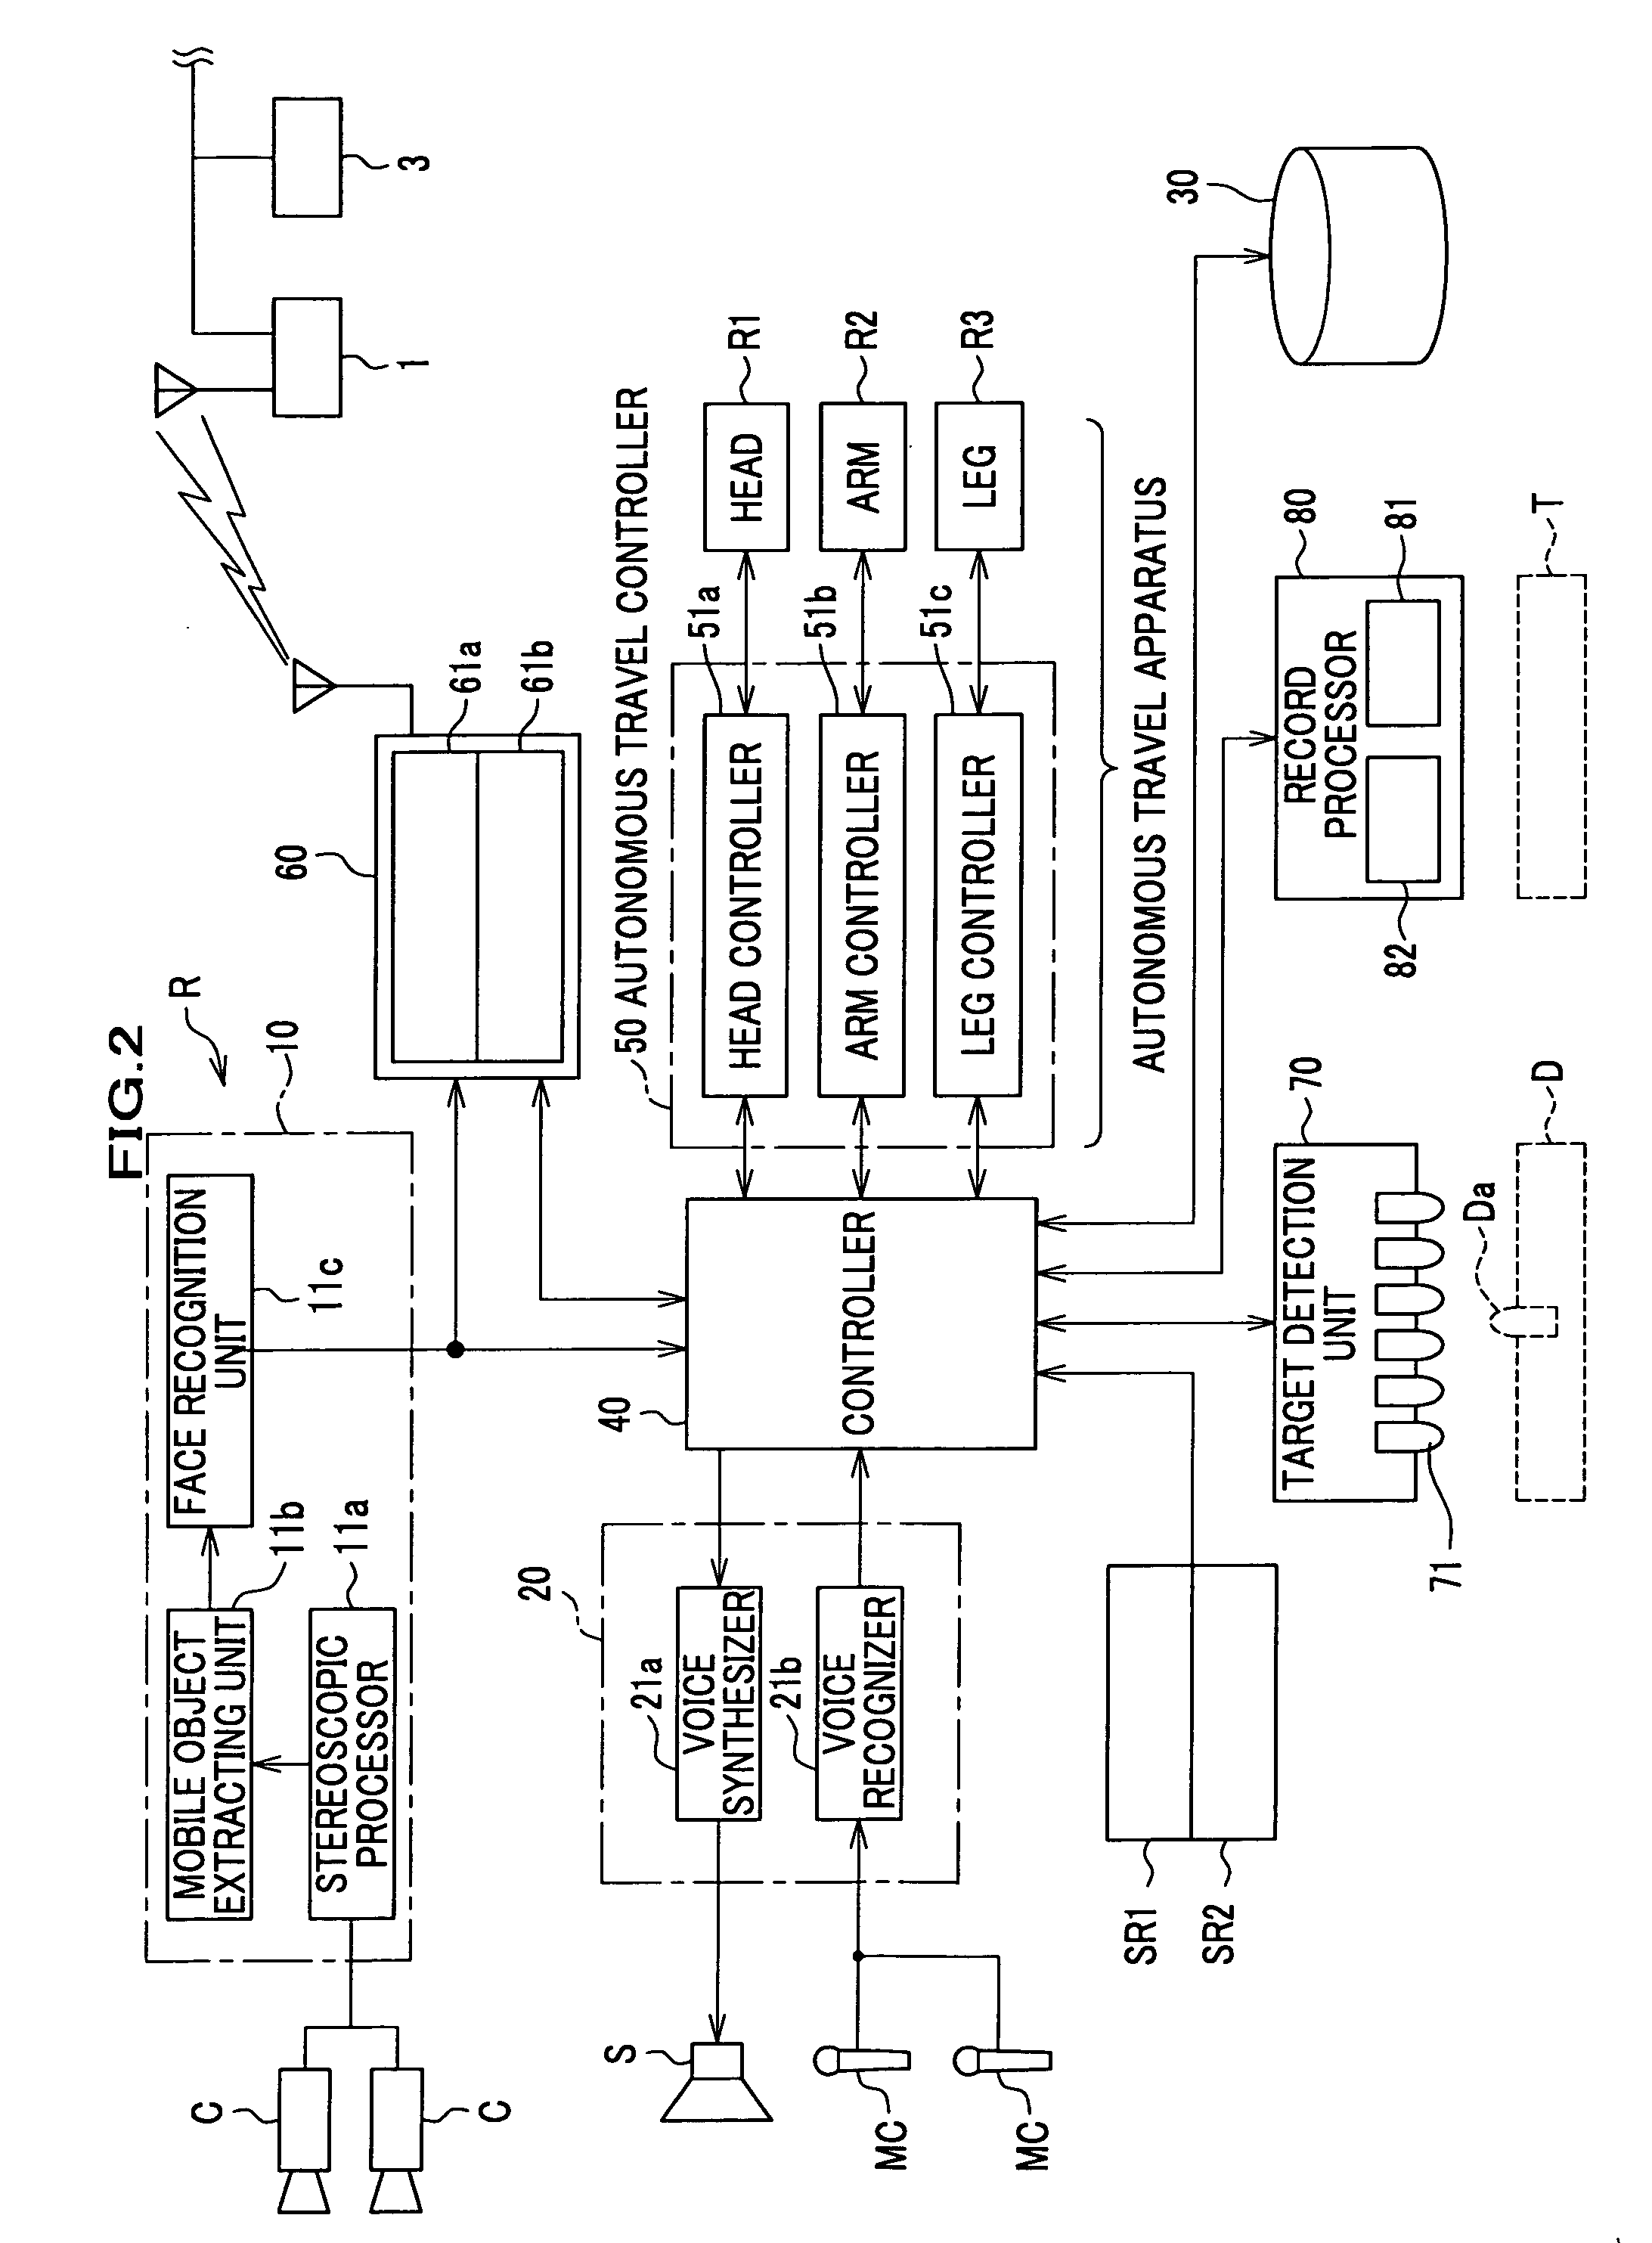 Interface apparatus and mobile robot equipped with the interface apparatus